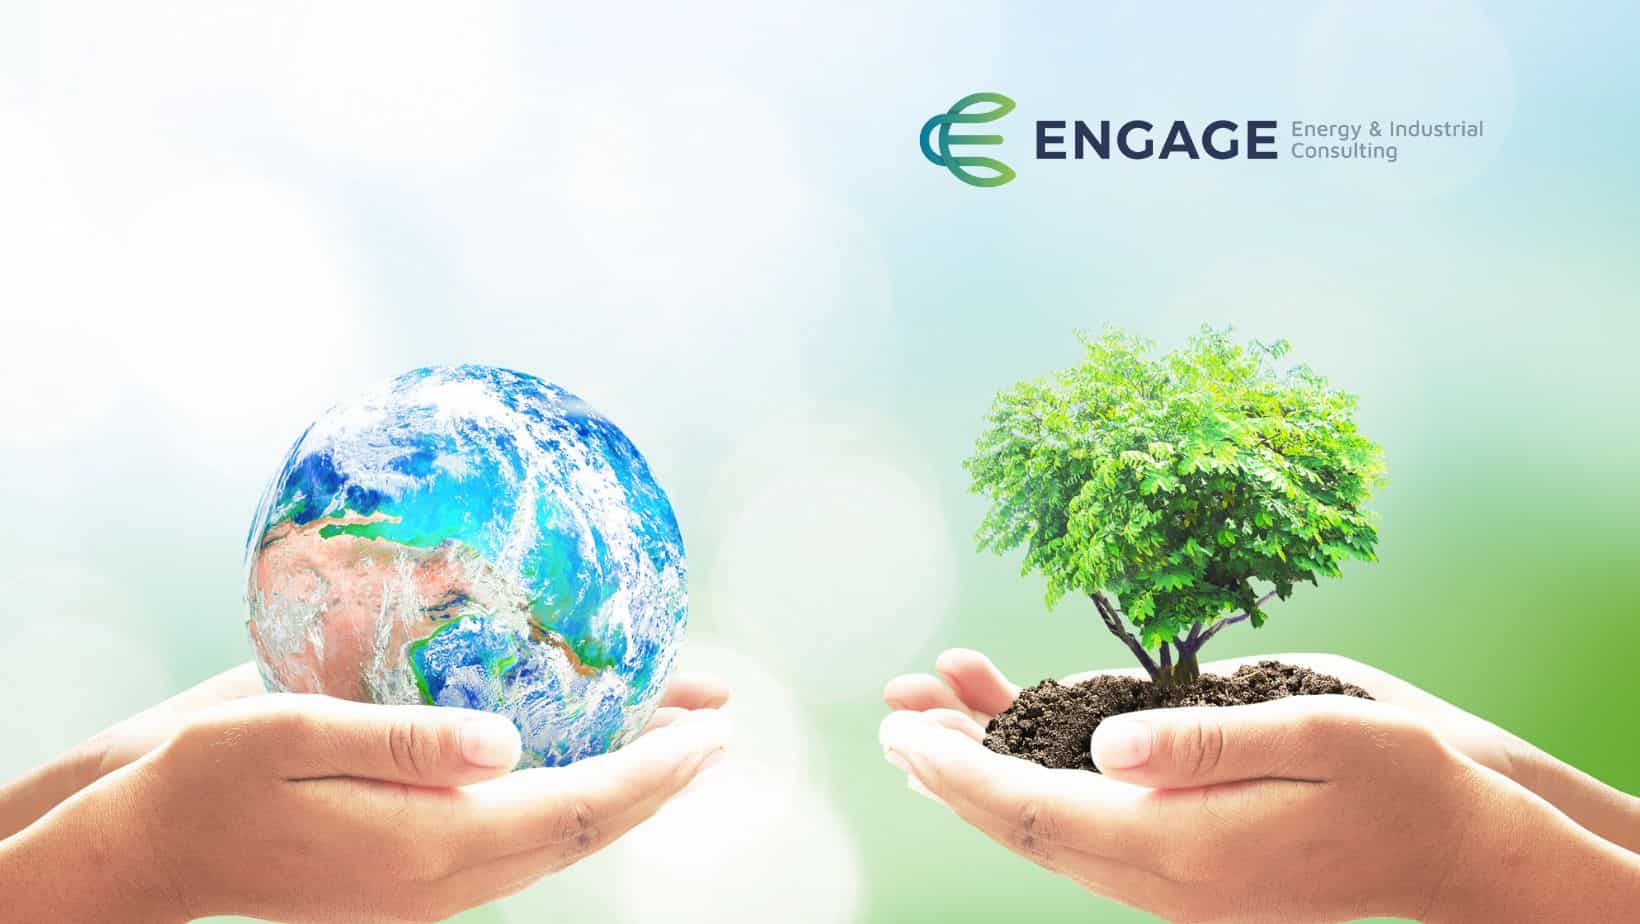 person holding the world in their hands on the left and a tree growing in hands on the right. Representing ESG Initiatives. Engage logo top right.